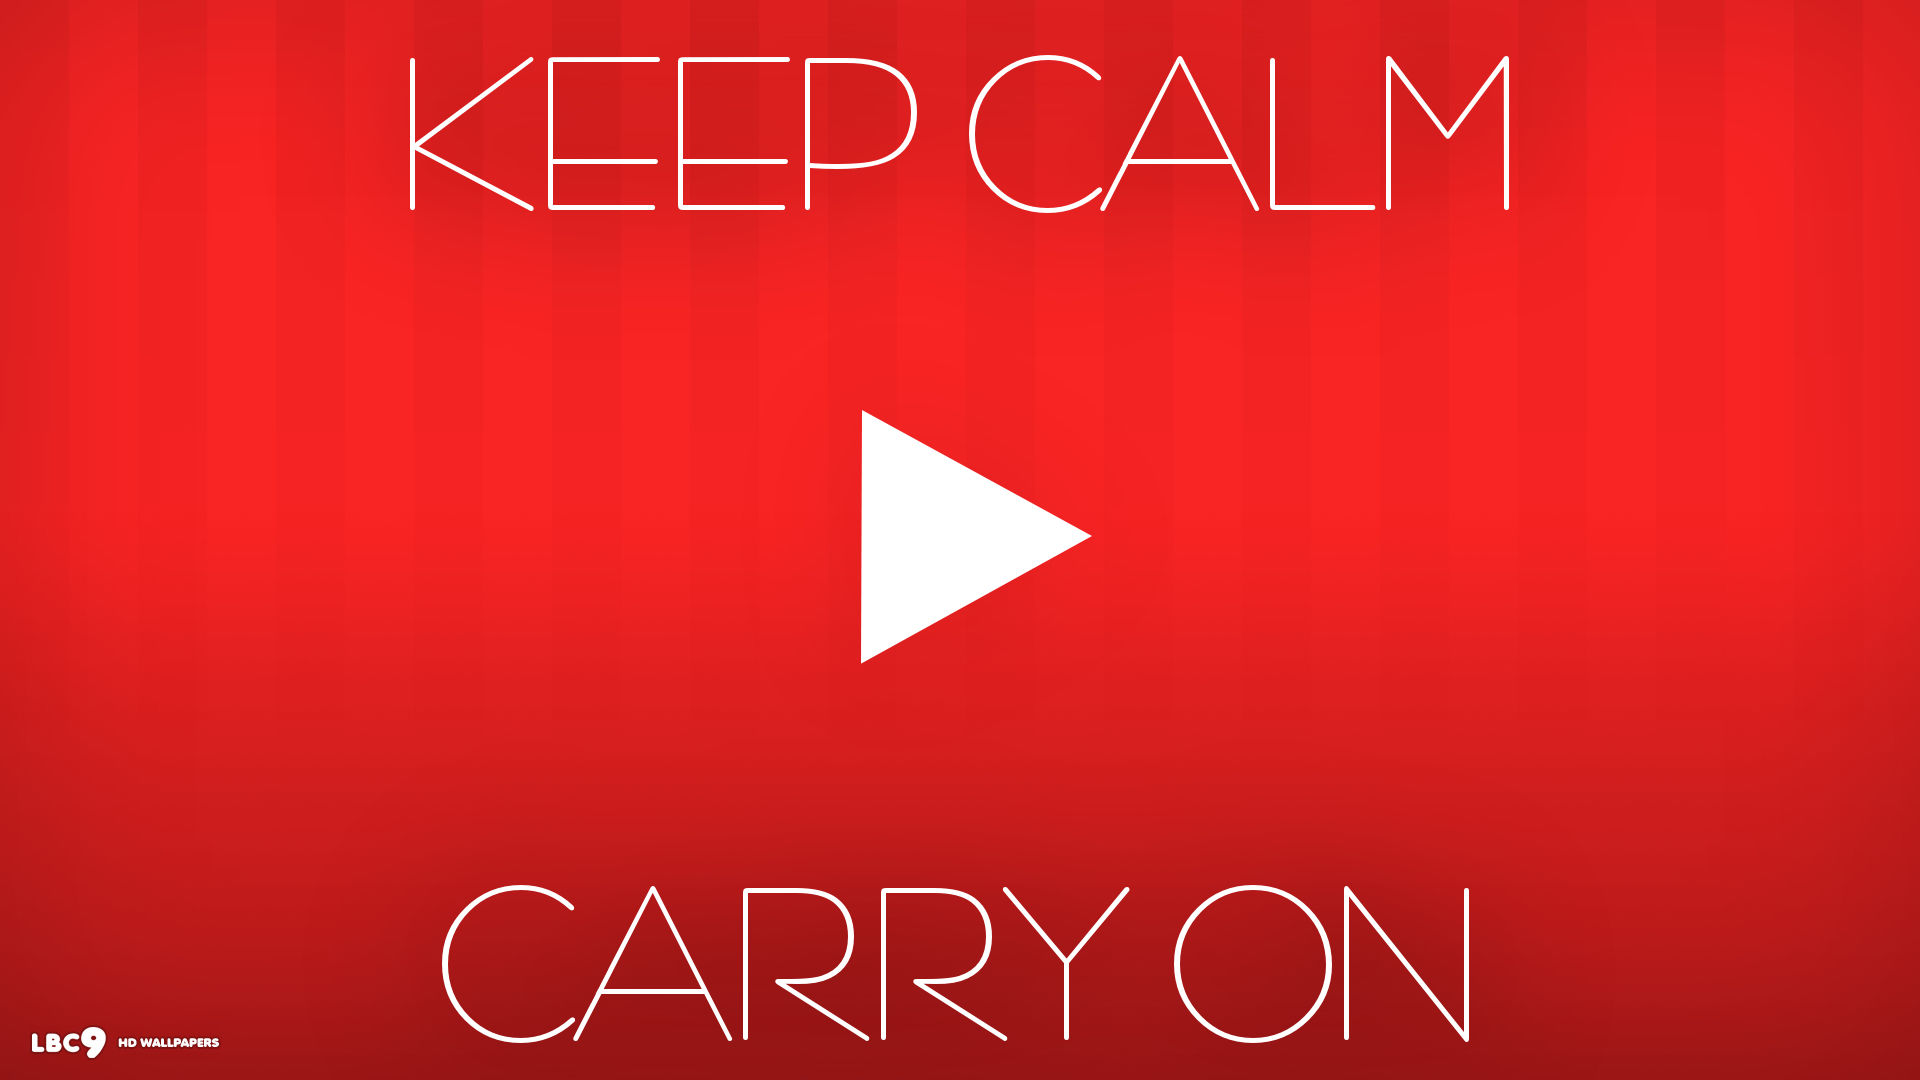 keep calm wallpapers,red,font,text,logo,graphic design